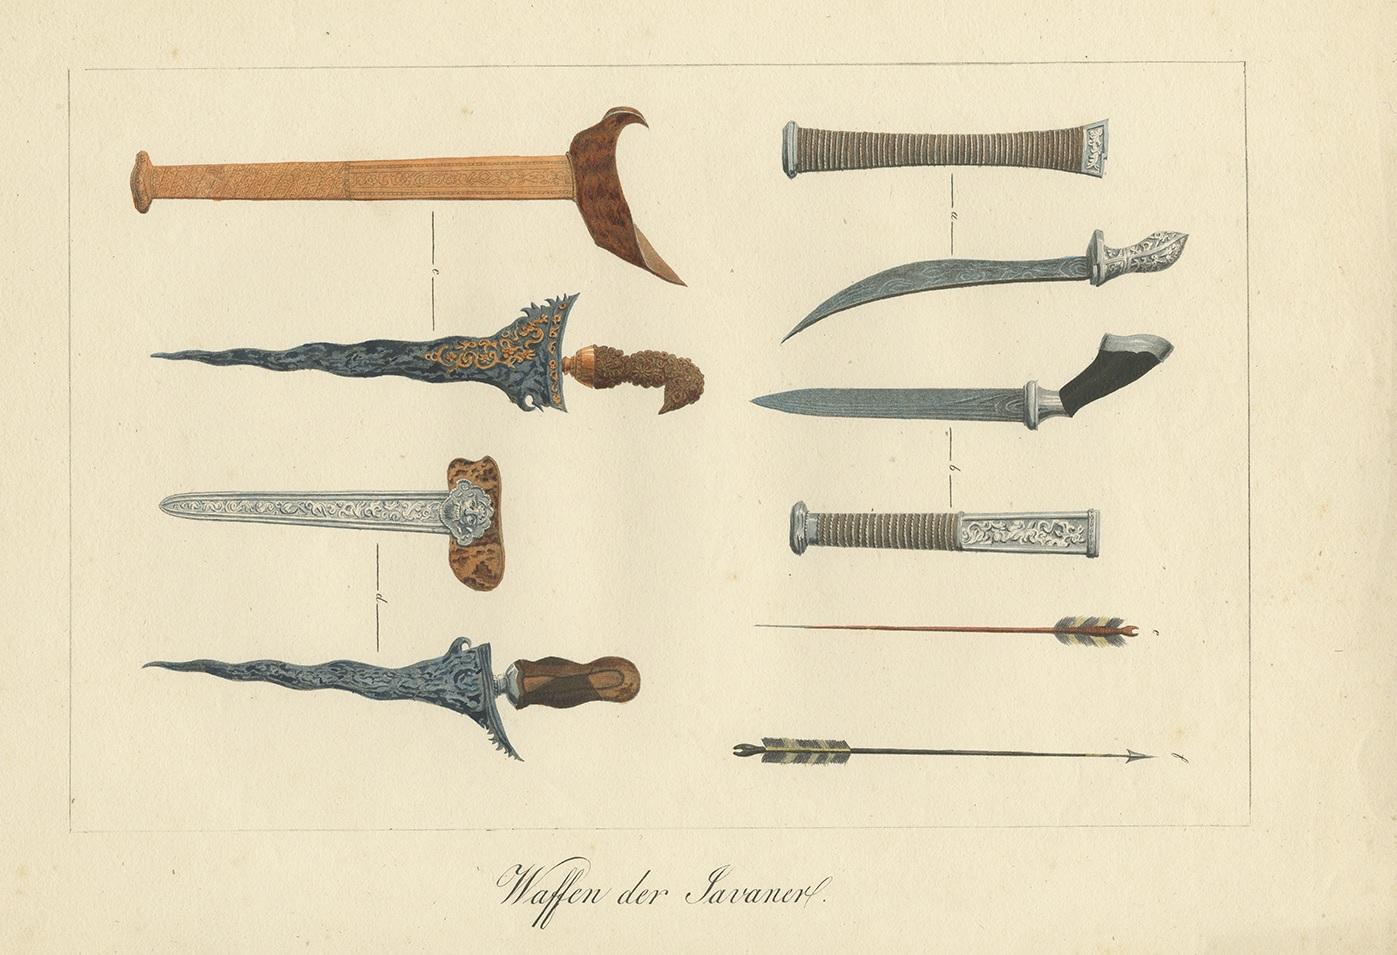 Antique print titled 'Waffen der Javaner'. Uncommon engraving of weapons from Java, Indonesia. Shows; a: Gollok, b: Badeh; c: Kris; d: Kris of the Madurese; e: arrow from Java; f: arrow from Ternate. This print originates from 'Skizzen von der Insel